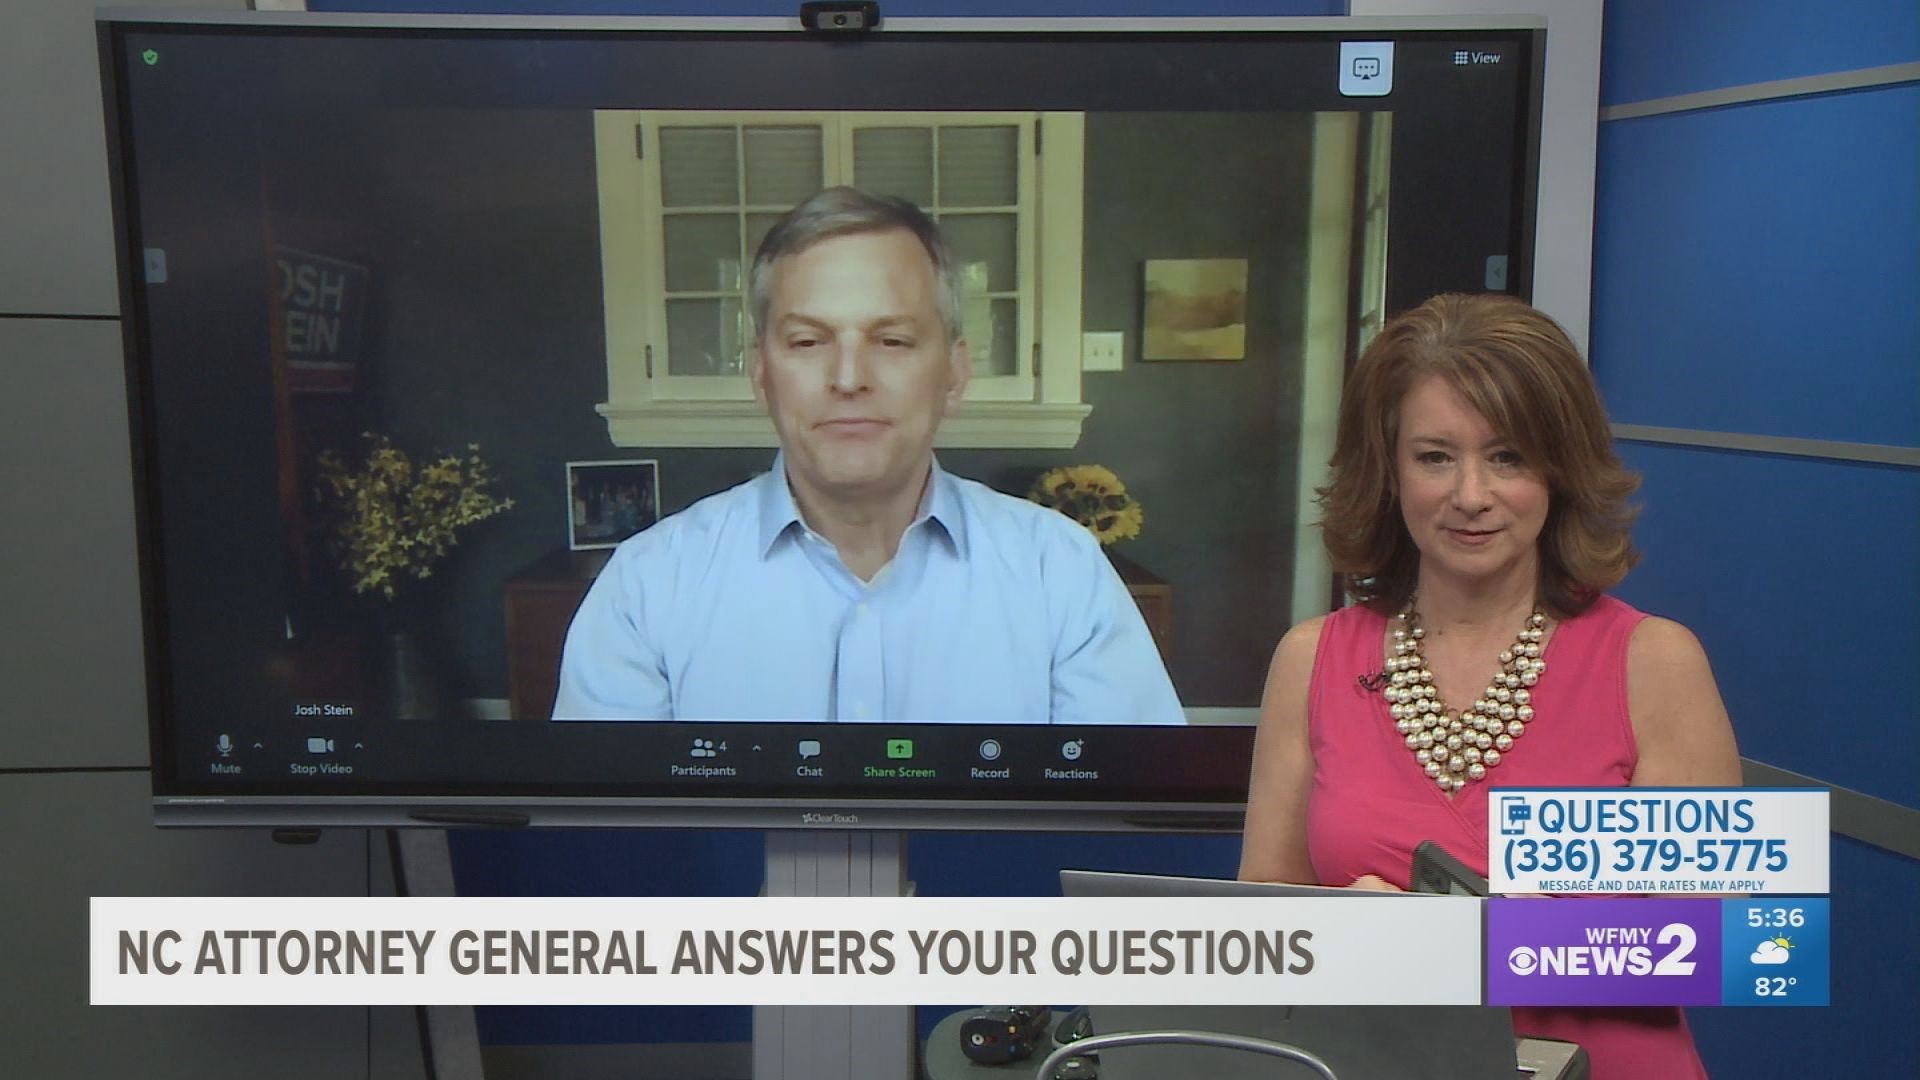 Attorney General Josh Stein answers viewer questions about scams and ways to protect themselves.